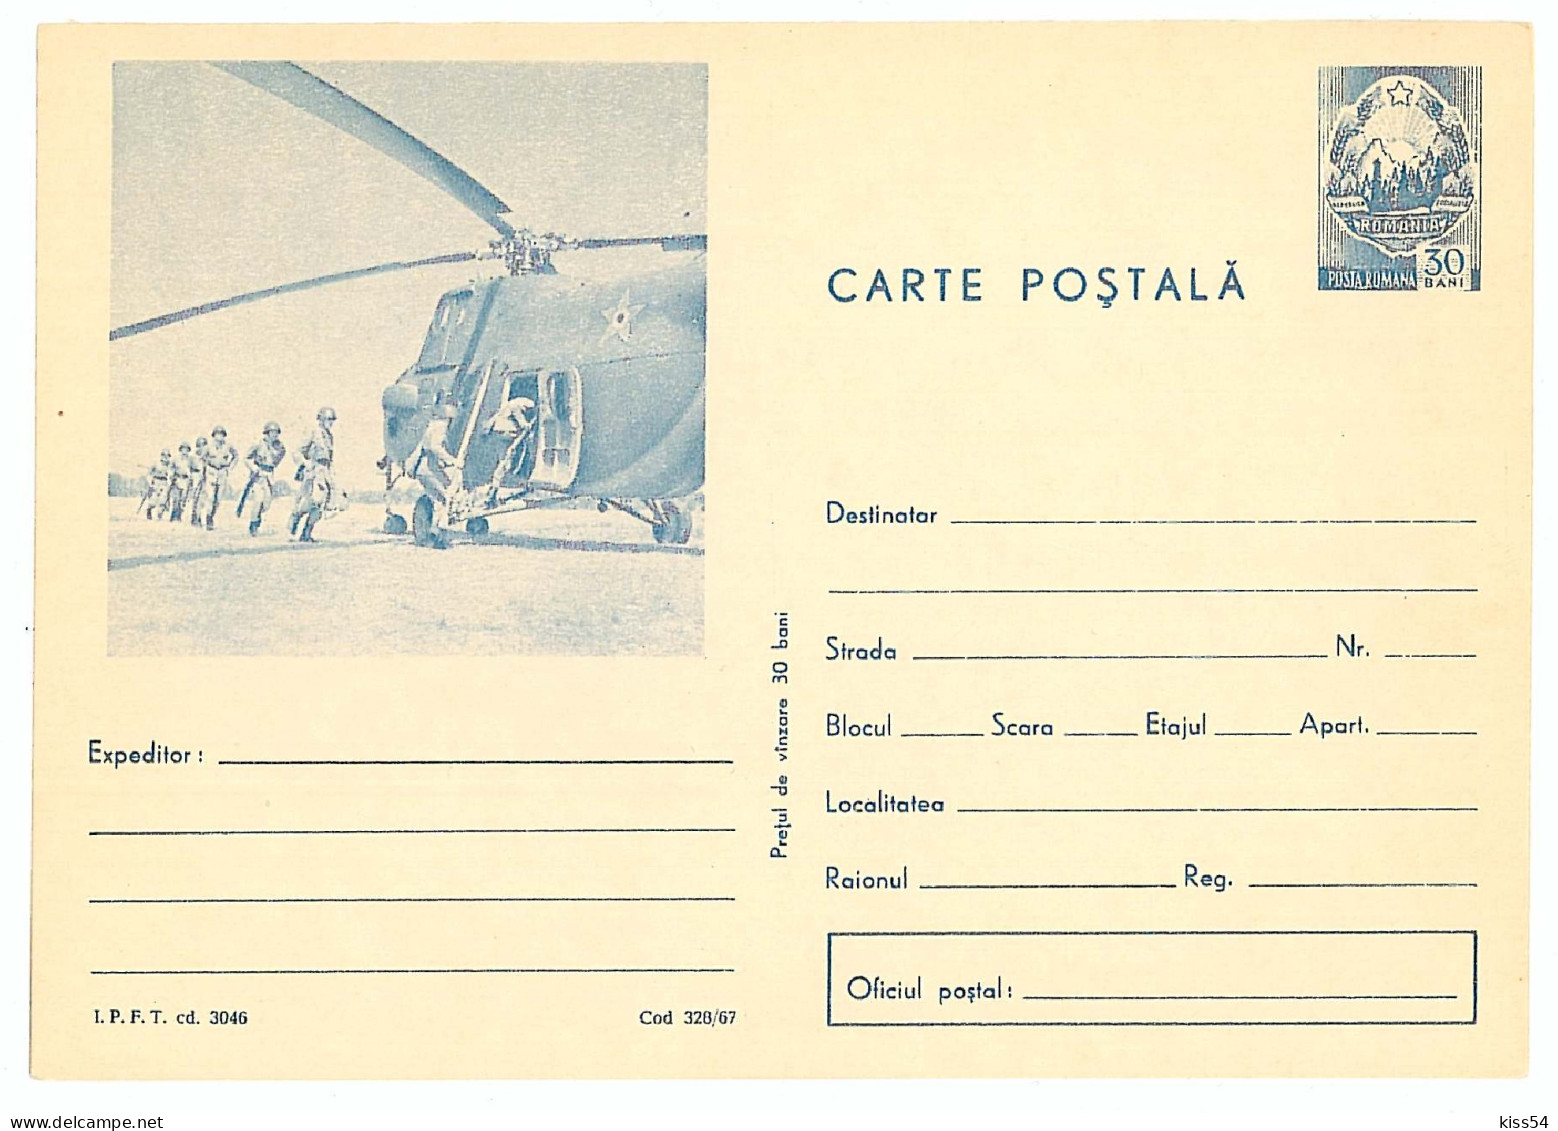 IP 67 - 328a MILITARY, Helicopter, Romania - Staionery - Unused - 1967 - Postal Stationery